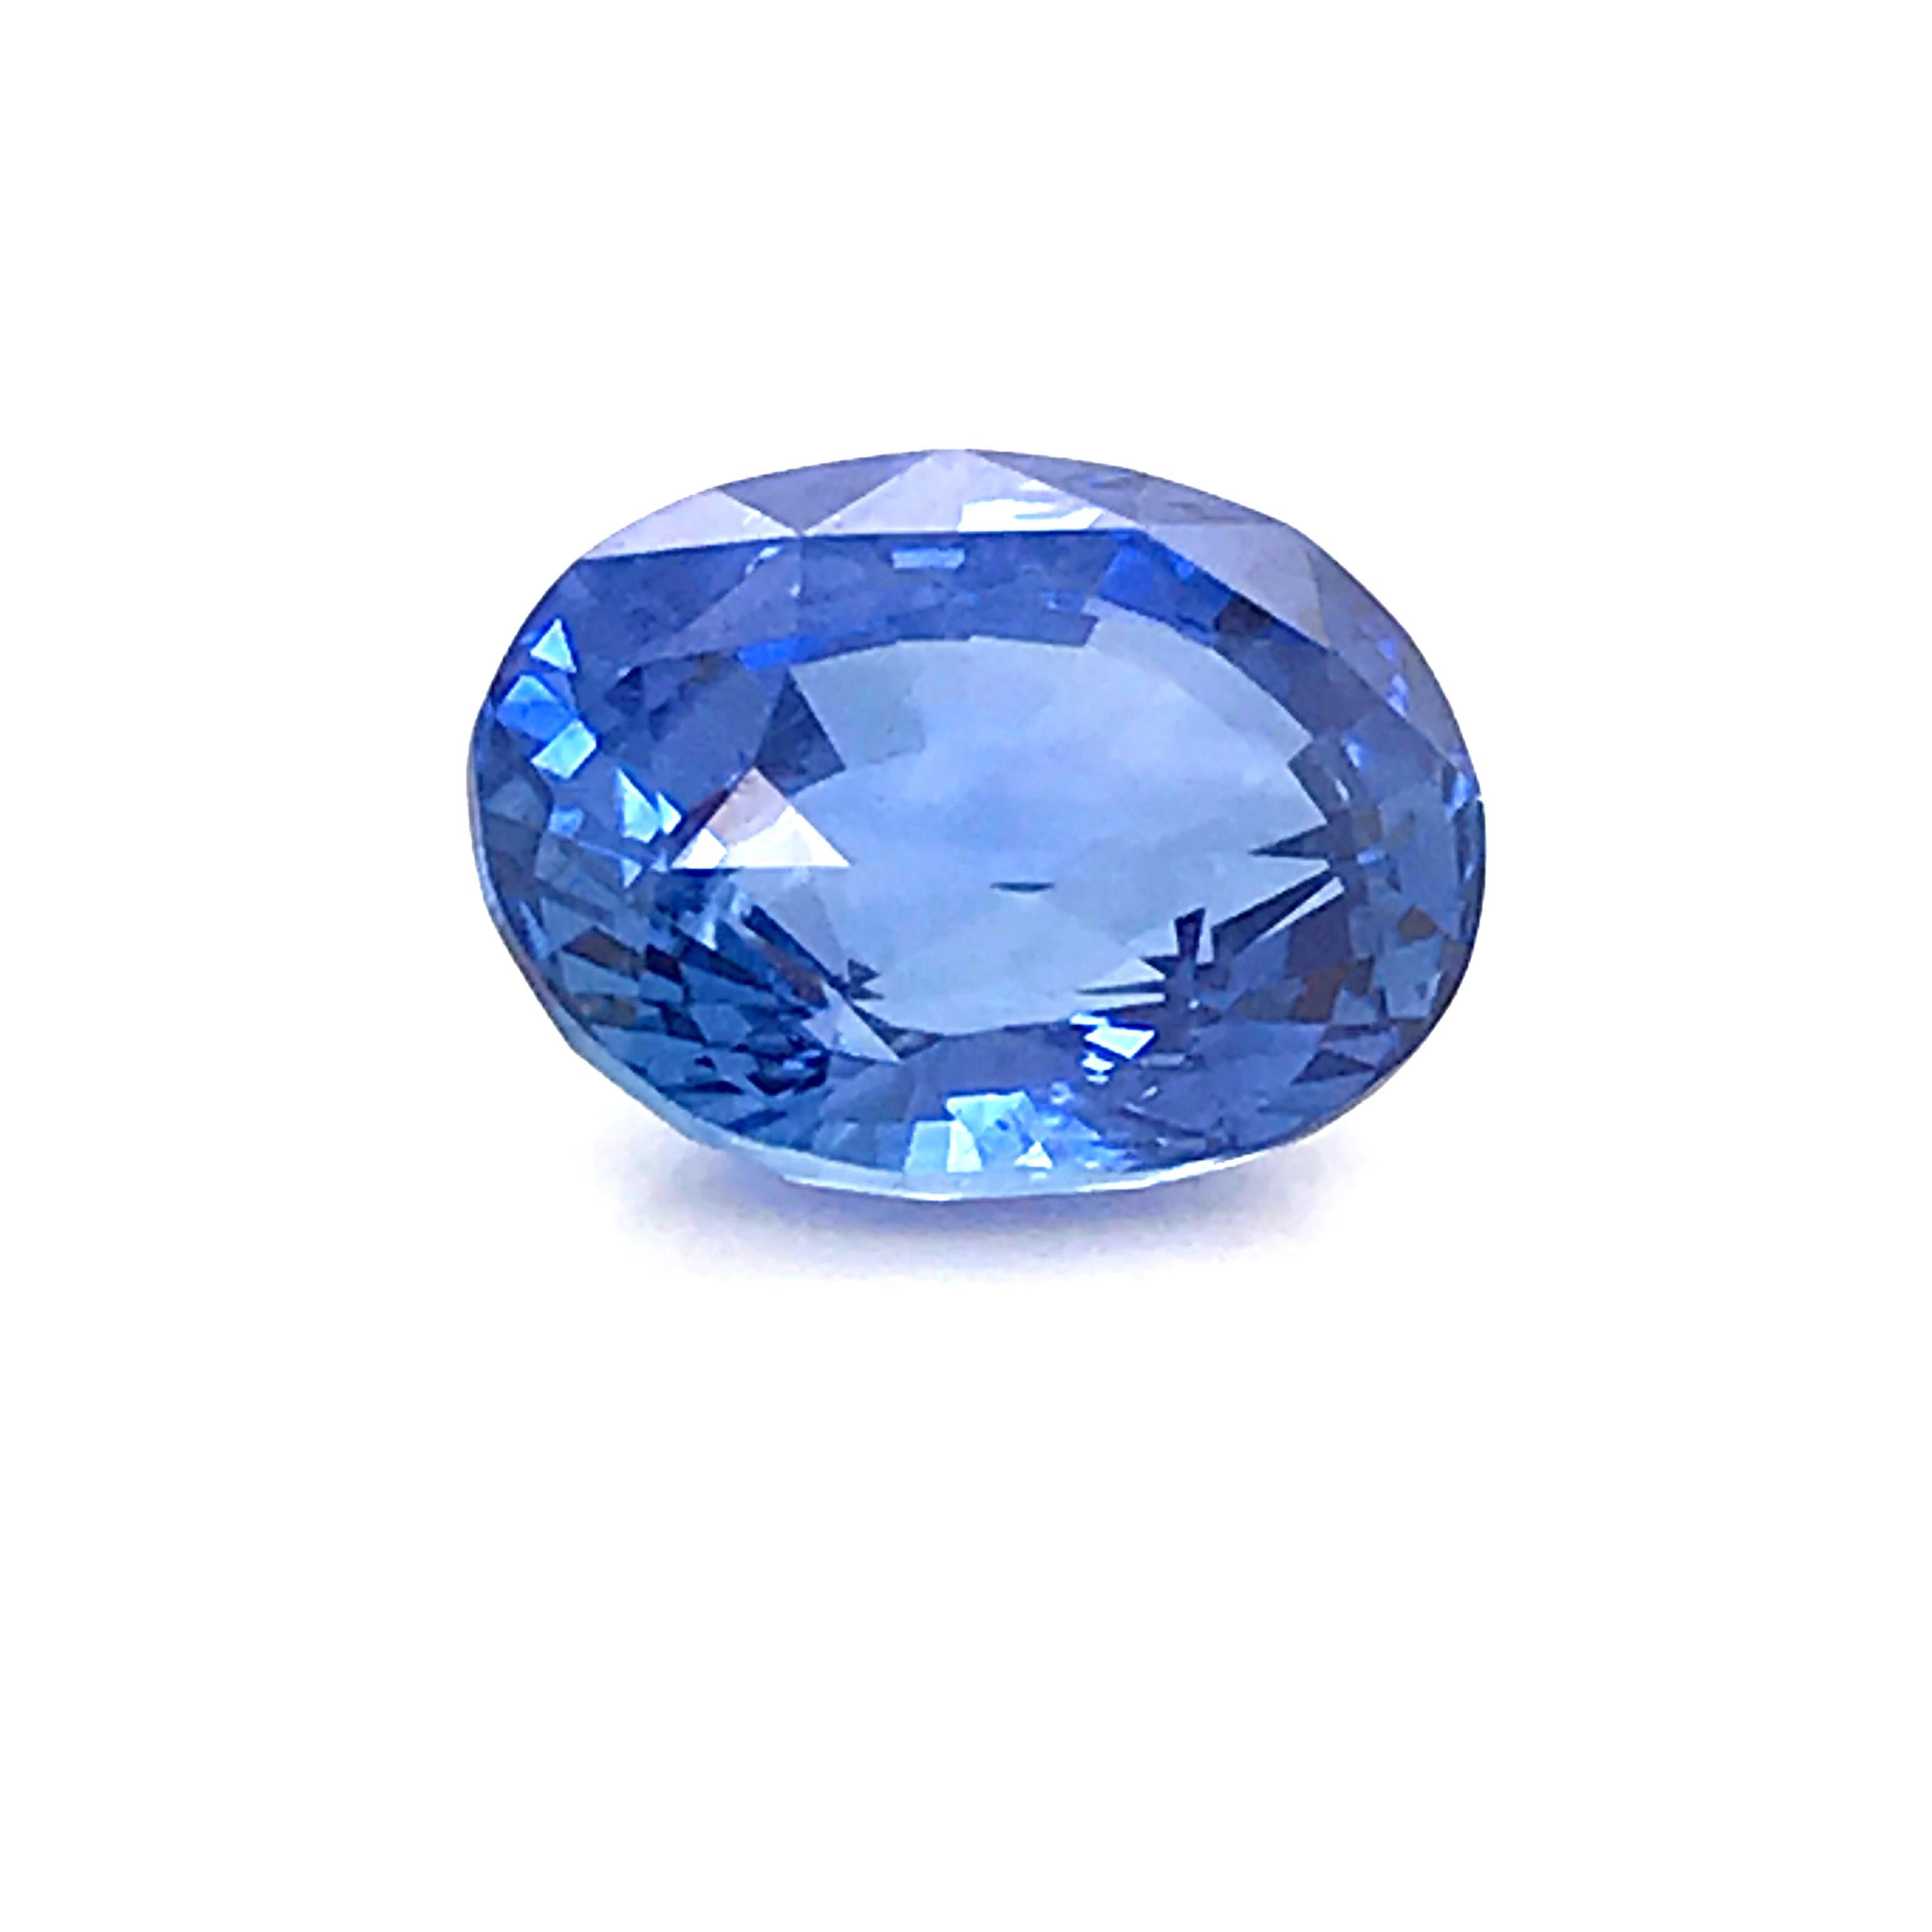 Natural Sapphire Certified Origin Sri Lanka Shape Oval Color Blue GRS Certificat
Discover this exceptional stone Natural Sapphire from Sri Lanka 
Shape Oval blue Color 
Weight 4.34 ct 
Dimensions 10.50 x 8.11 x 6.04 mm 
Shape Oval
Color Blue 
GRS